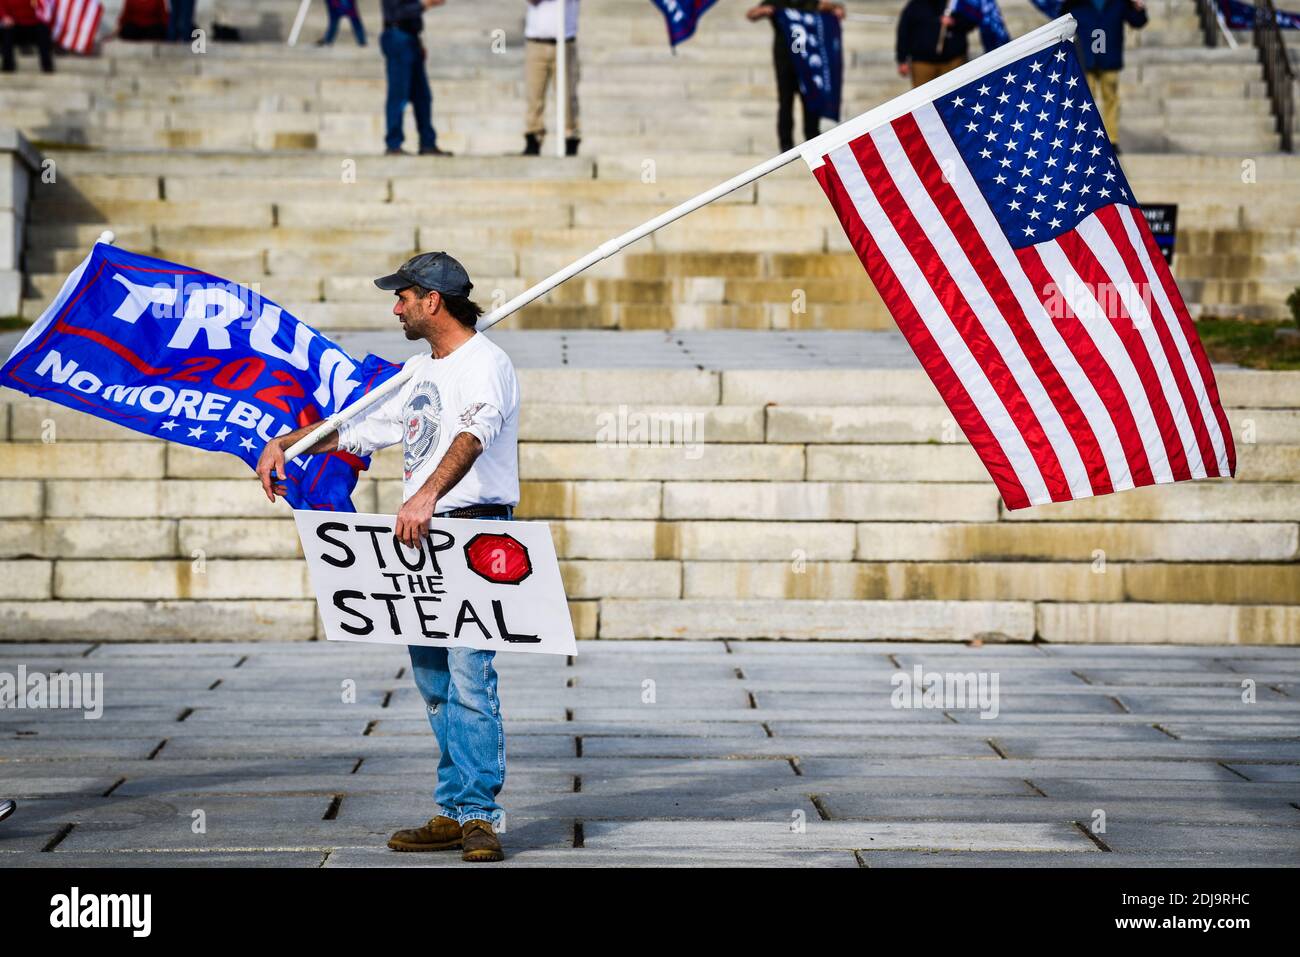 Pro-Trump demonstrators AFTER THE US 2020 PRESIDENTIAL ELECTION in front of the Vermont State House, Montpelier, VT, USA. Stock Photo